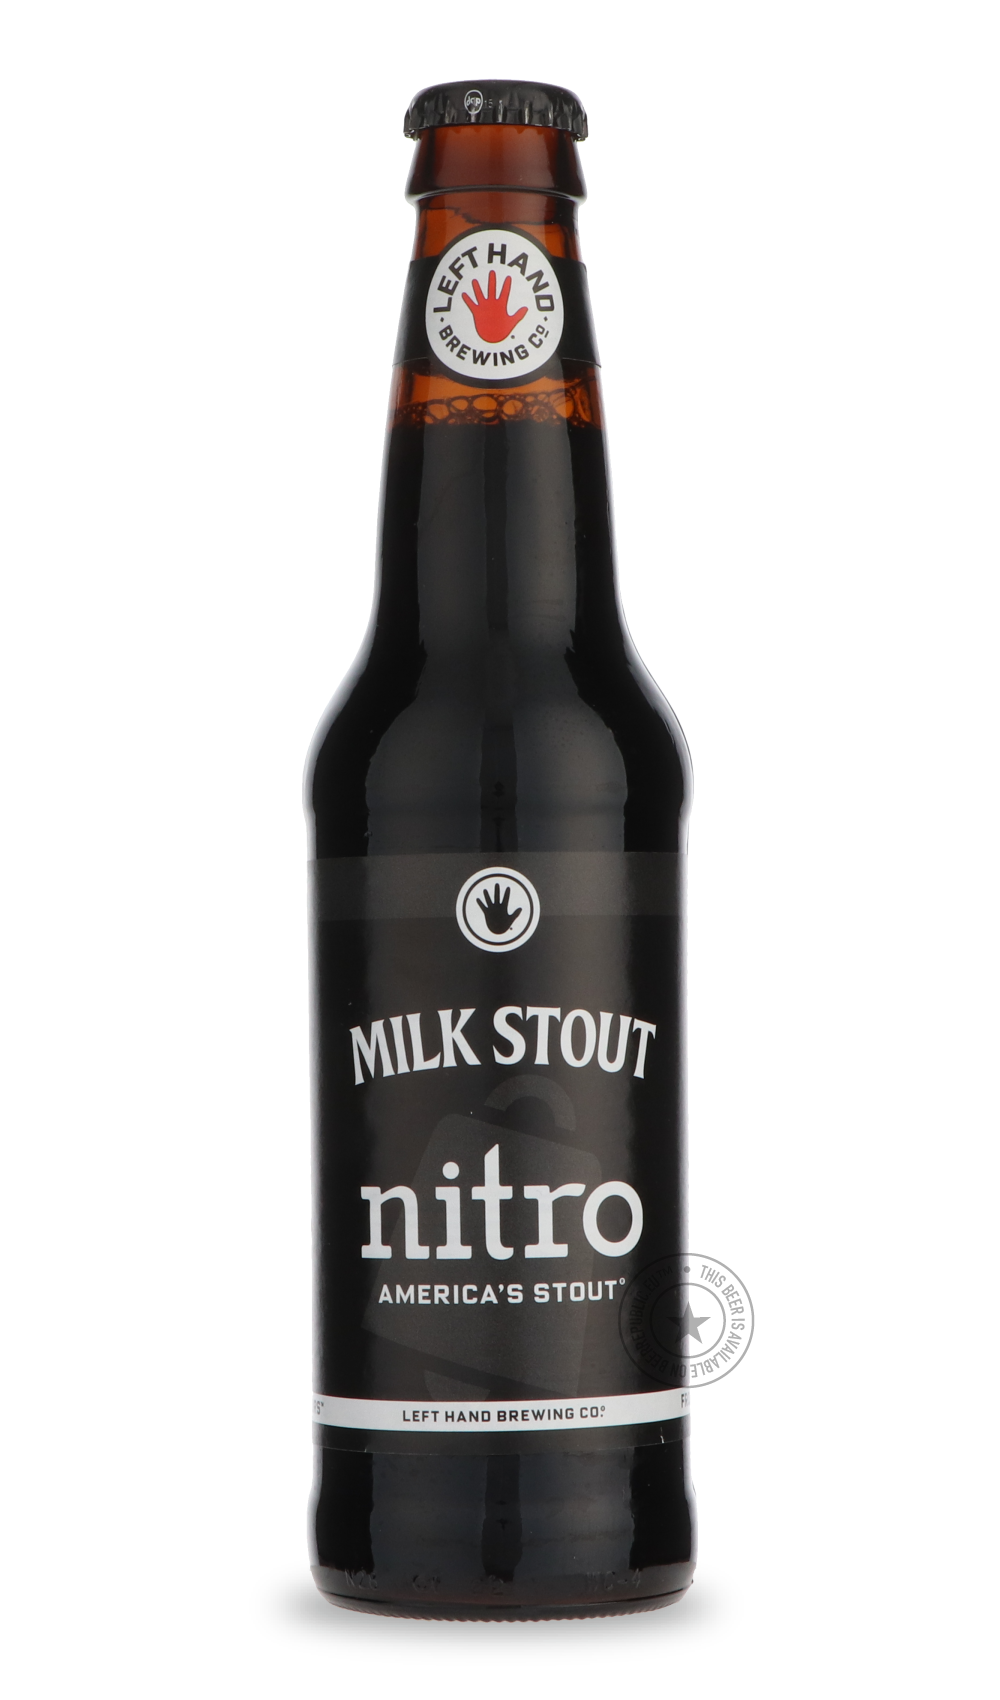 -Left Hand- Milk Stout Nitro (Bottle)-Stout & Porter- Only @ Beer Republic - The best online beer store for American & Canadian craft beer - Buy beer online from the USA and Canada - Bier online kopen - Amerikaans bier kopen - Craft beer store - Craft beer kopen - Amerikanisch bier kaufen - Bier online kaufen - Acheter biere online - IPA - Stout - Porter - New England IPA - Hazy IPA - Imperial Stout - Barrel Aged - Barrel Aged Imperial Stout - Brown - Dark beer - Blond - Blonde - Pilsner - Lager - Wheat - W